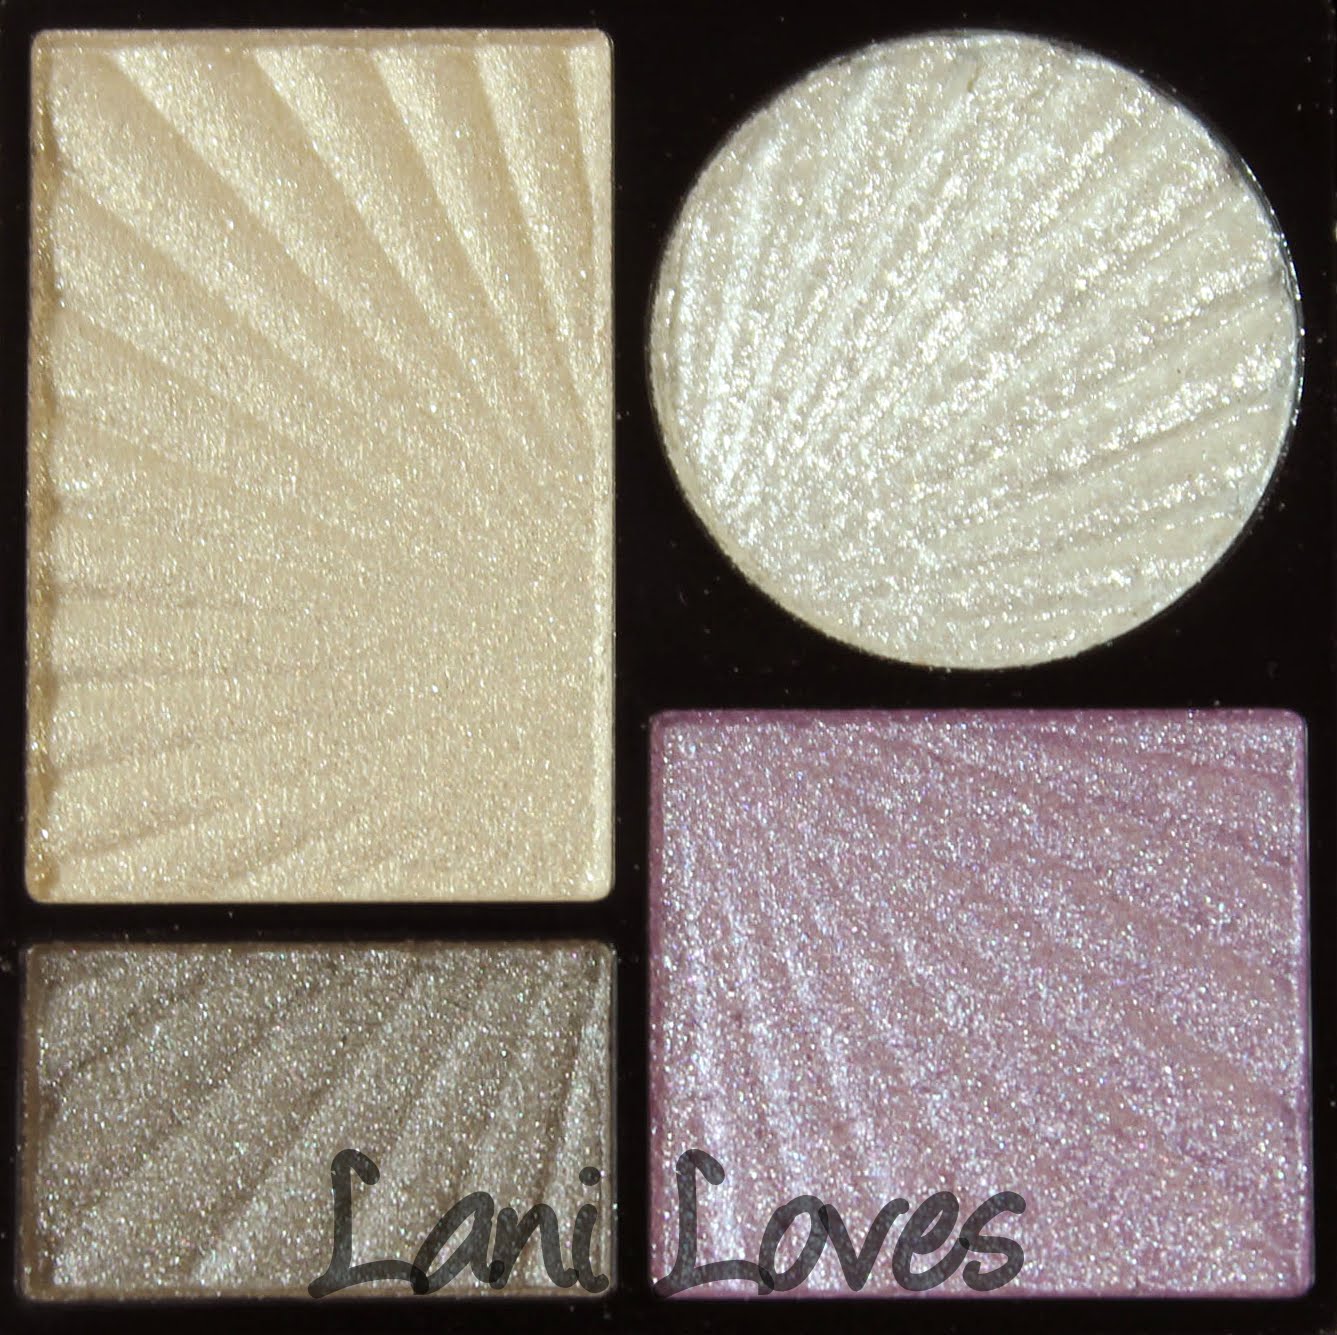 ZA Impact-Full Eyes Groovy Limited Edition Pure Silver eyeshadow palette